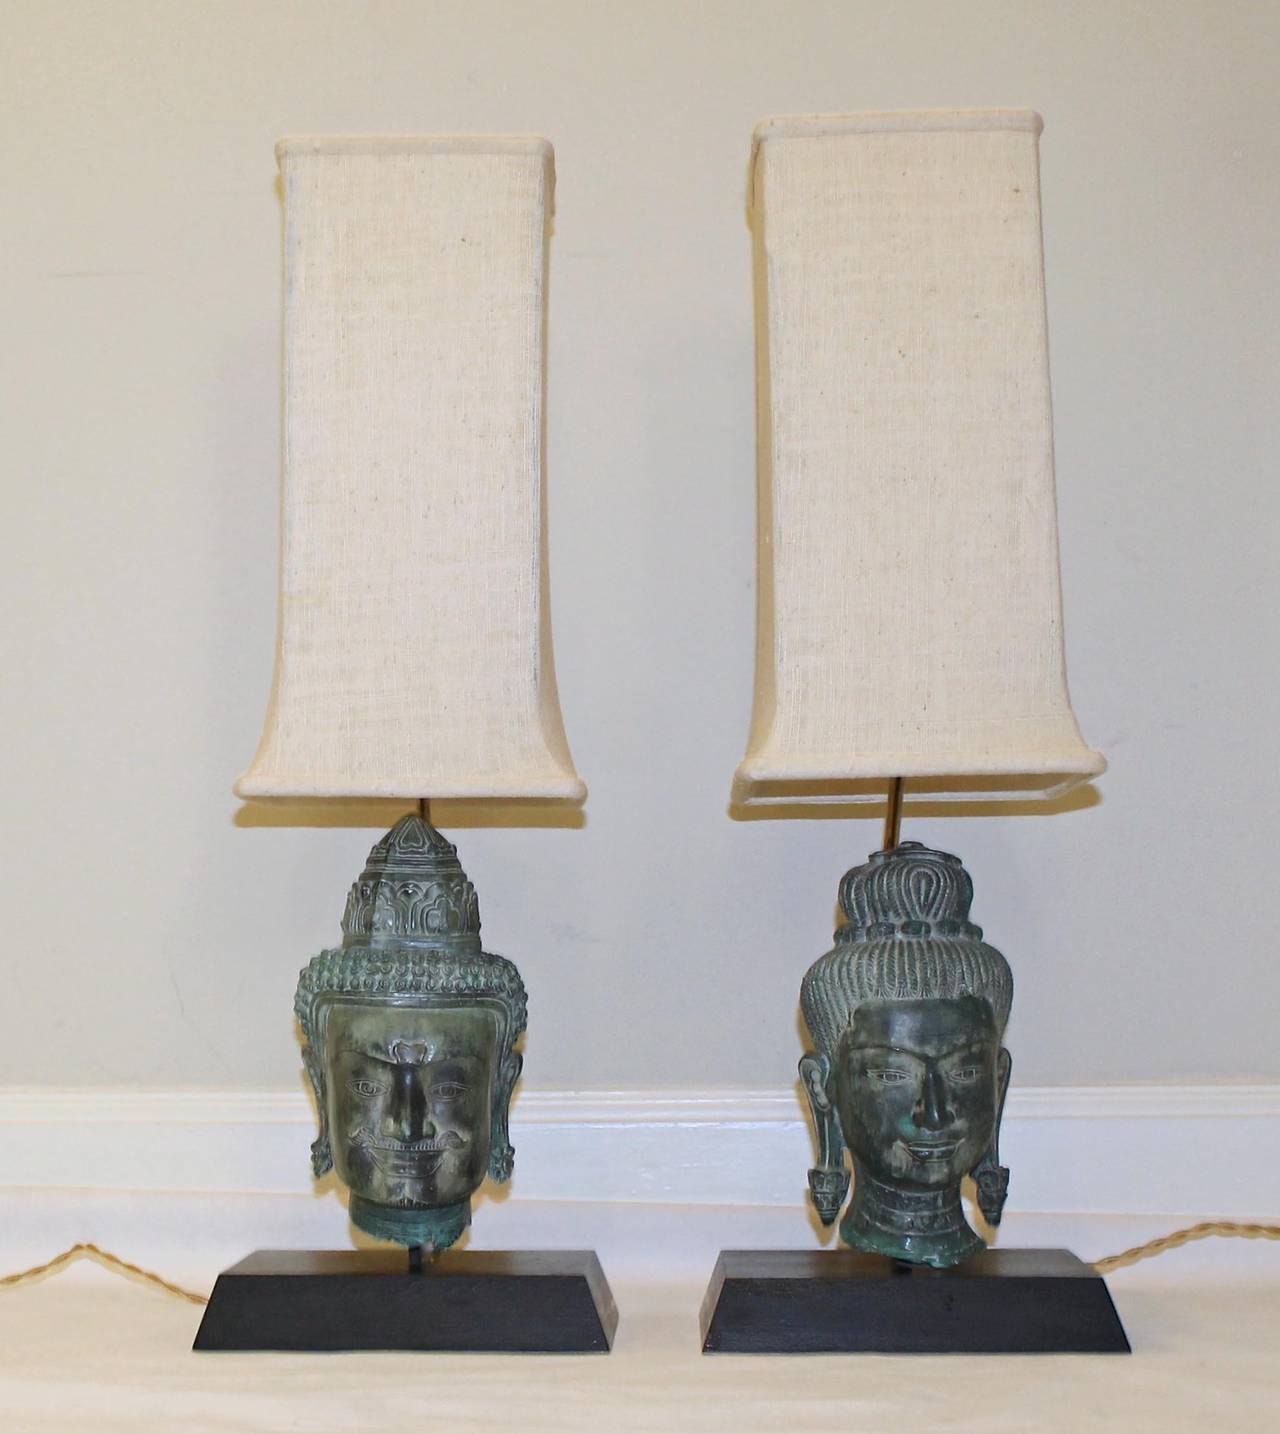 Fantastic and rare pair of patinated bronze female and male Burmese Buddha head lamps mounted on wood bases, with original stylized tall shades. Brass fittings, newly wired including French twist cords. 

Measures: Overall height with shade